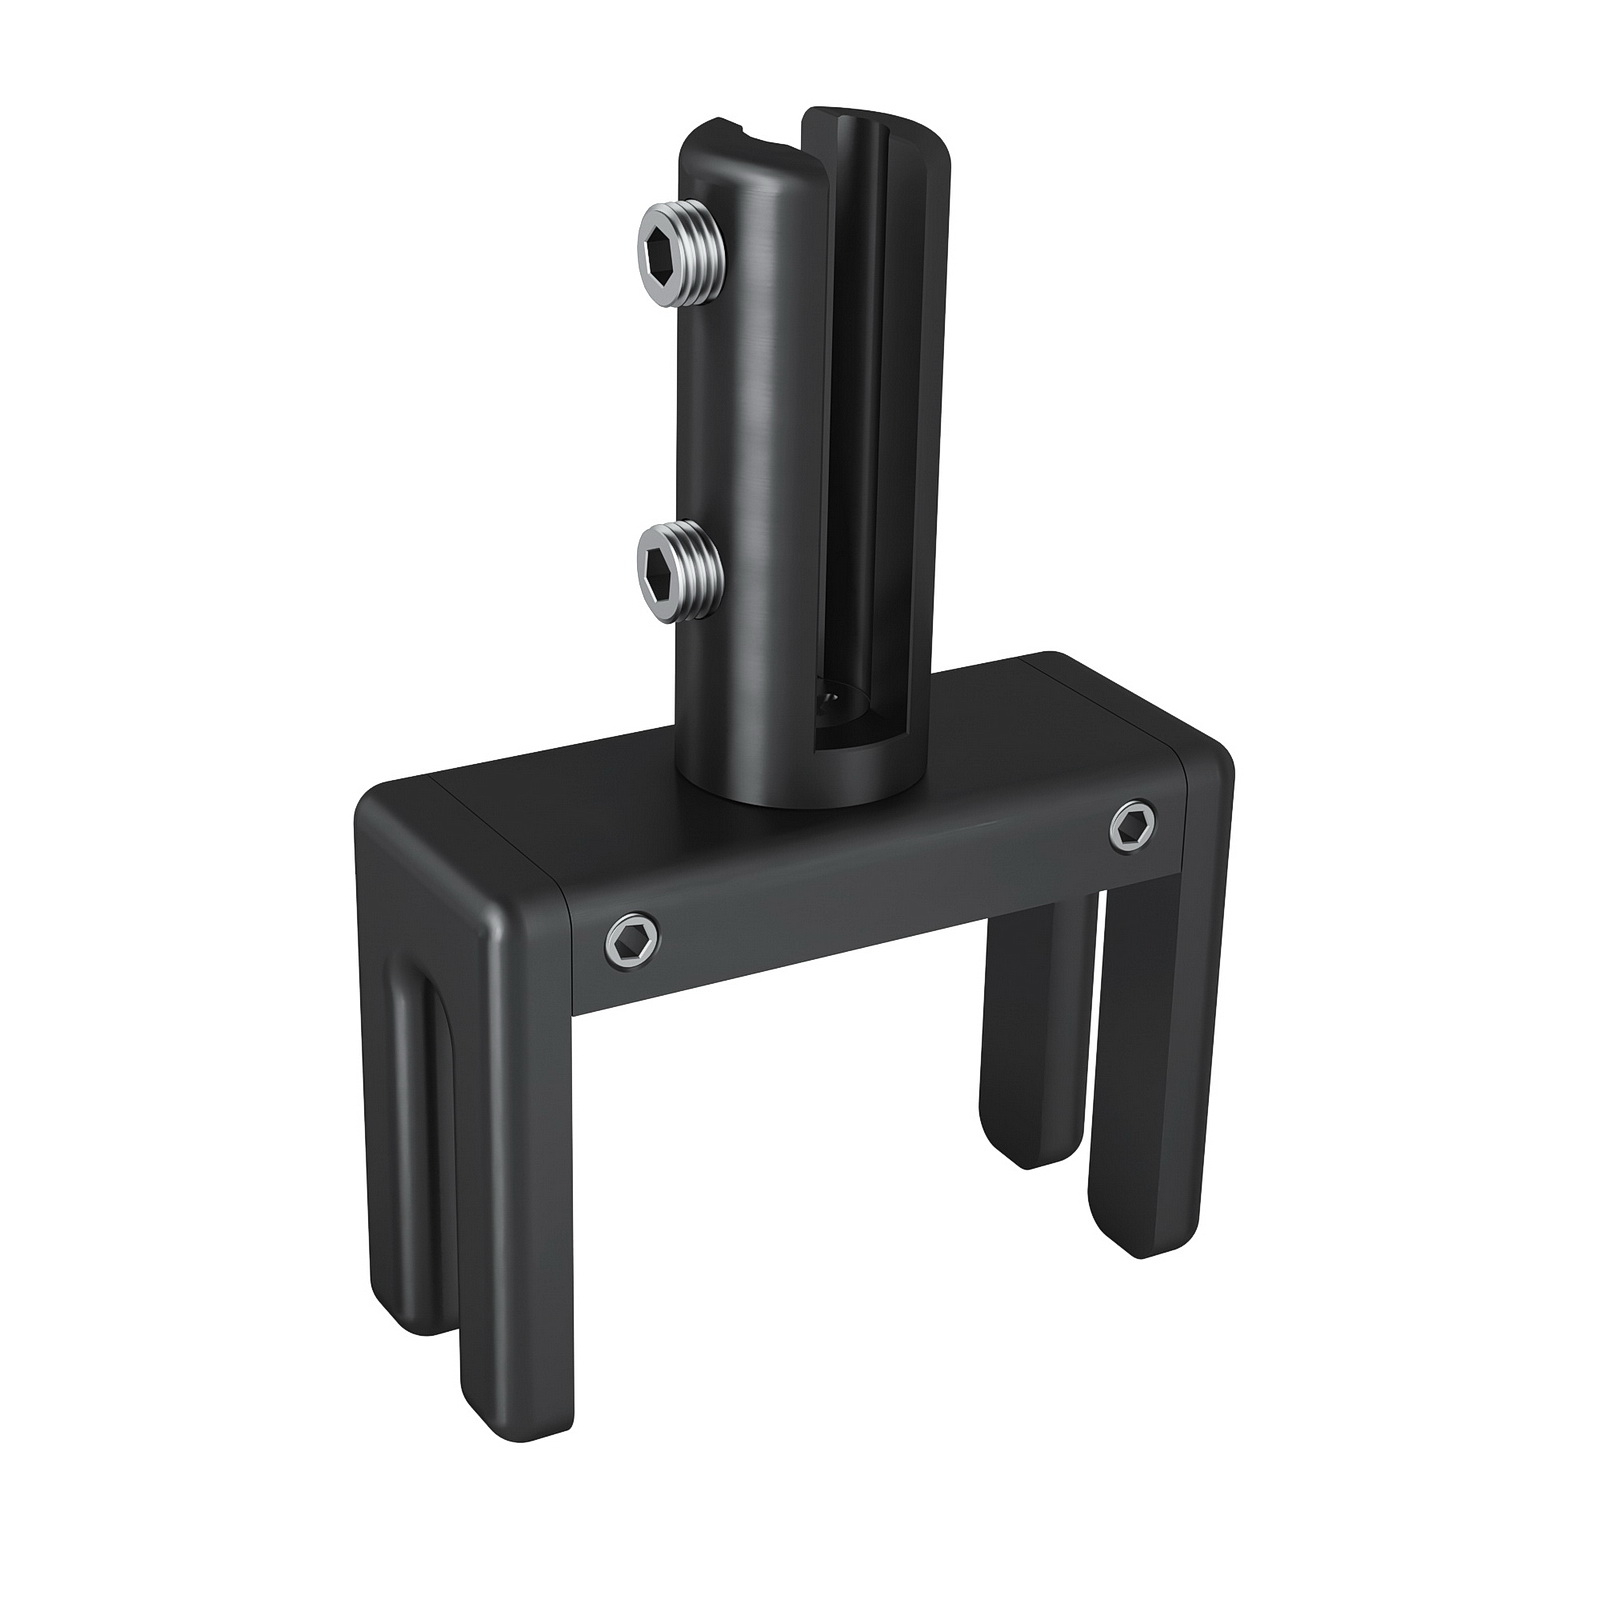 Set of 2, Adjustable Clamp, Aluminum Matte Black Anodized Finish, to Accommodate 1-3/4'' to 2-3/8'' Cubicle partition. Up to 1/4'' material accepted on the fork (included 4x 1'' and 4x 2'' bolt to adjust to different Cubicle)